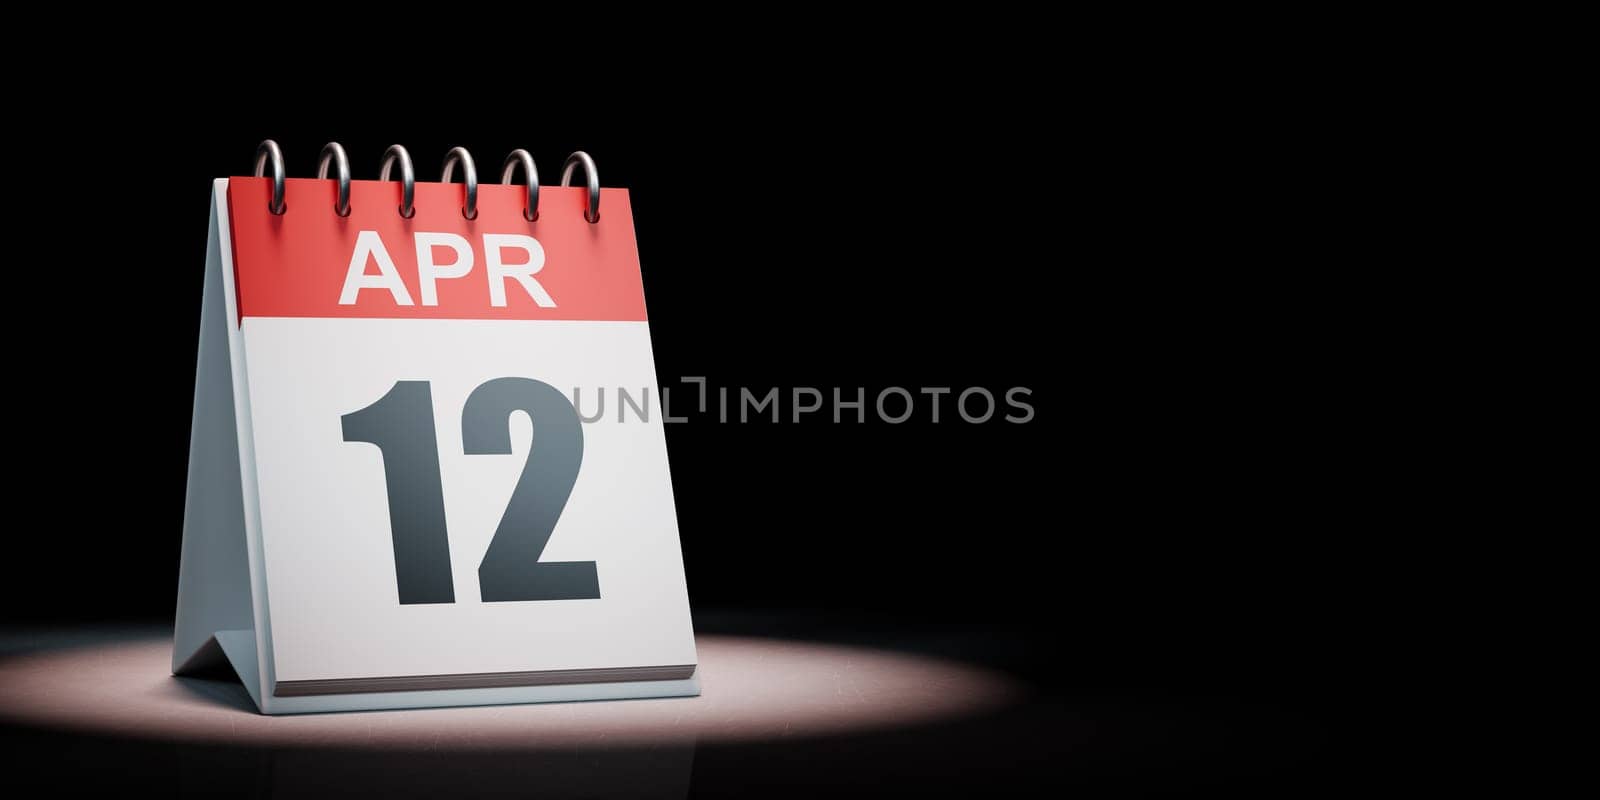 Red and White April 12 Desk Calendar Spotlighted on Black Background with Copy Space 3D Illustration